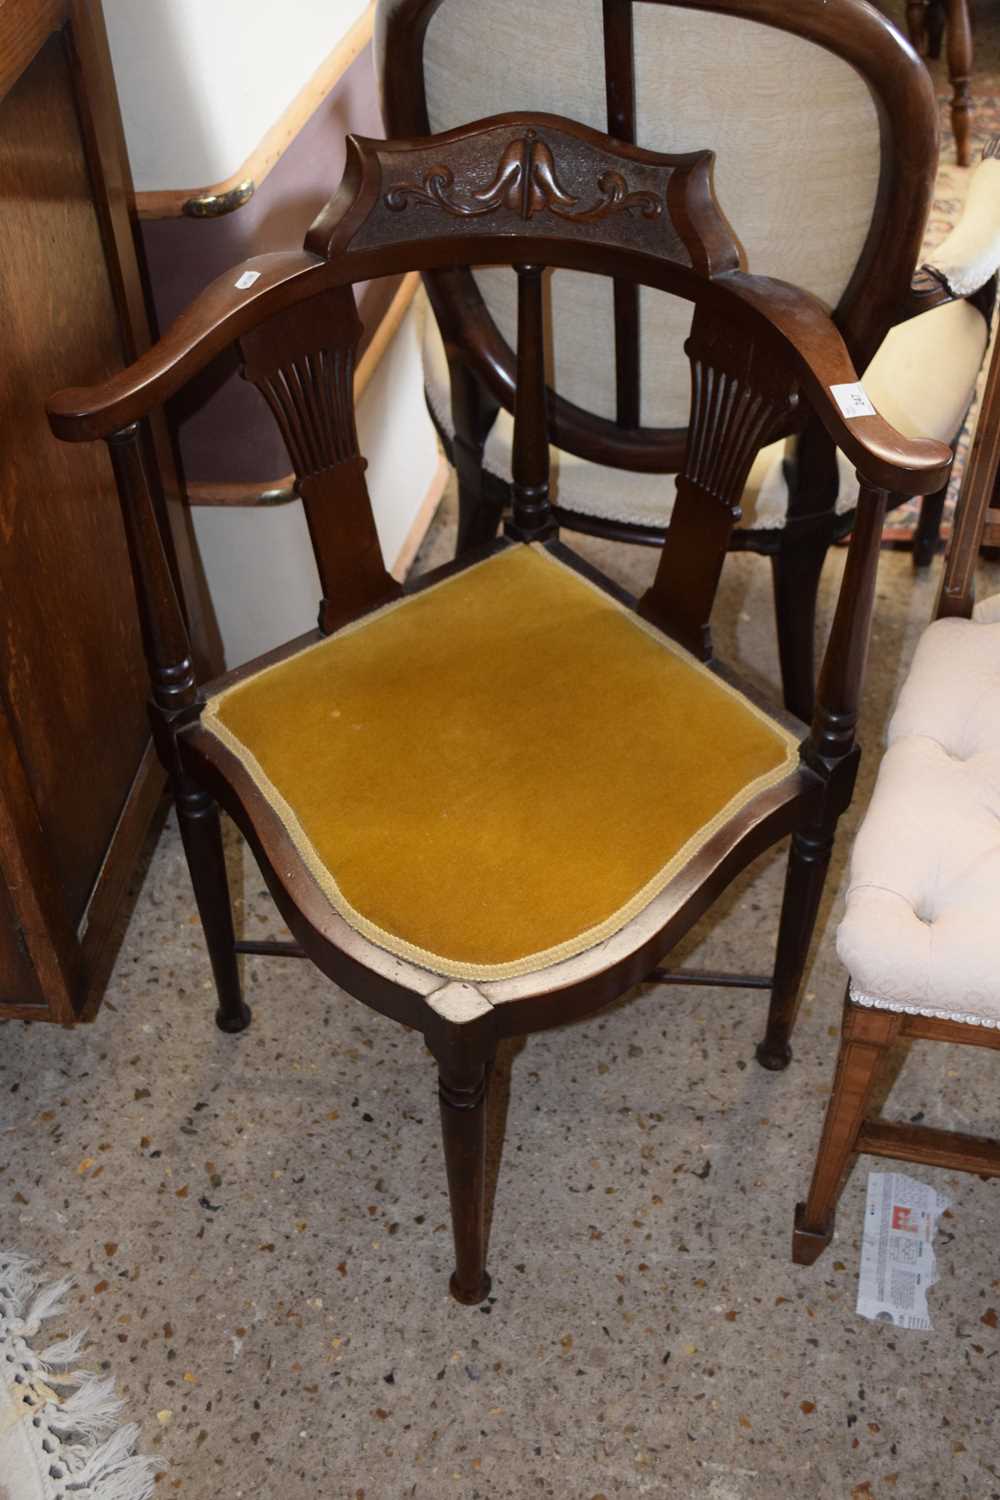 An Edwardian corner chair with mustard upholstered seat